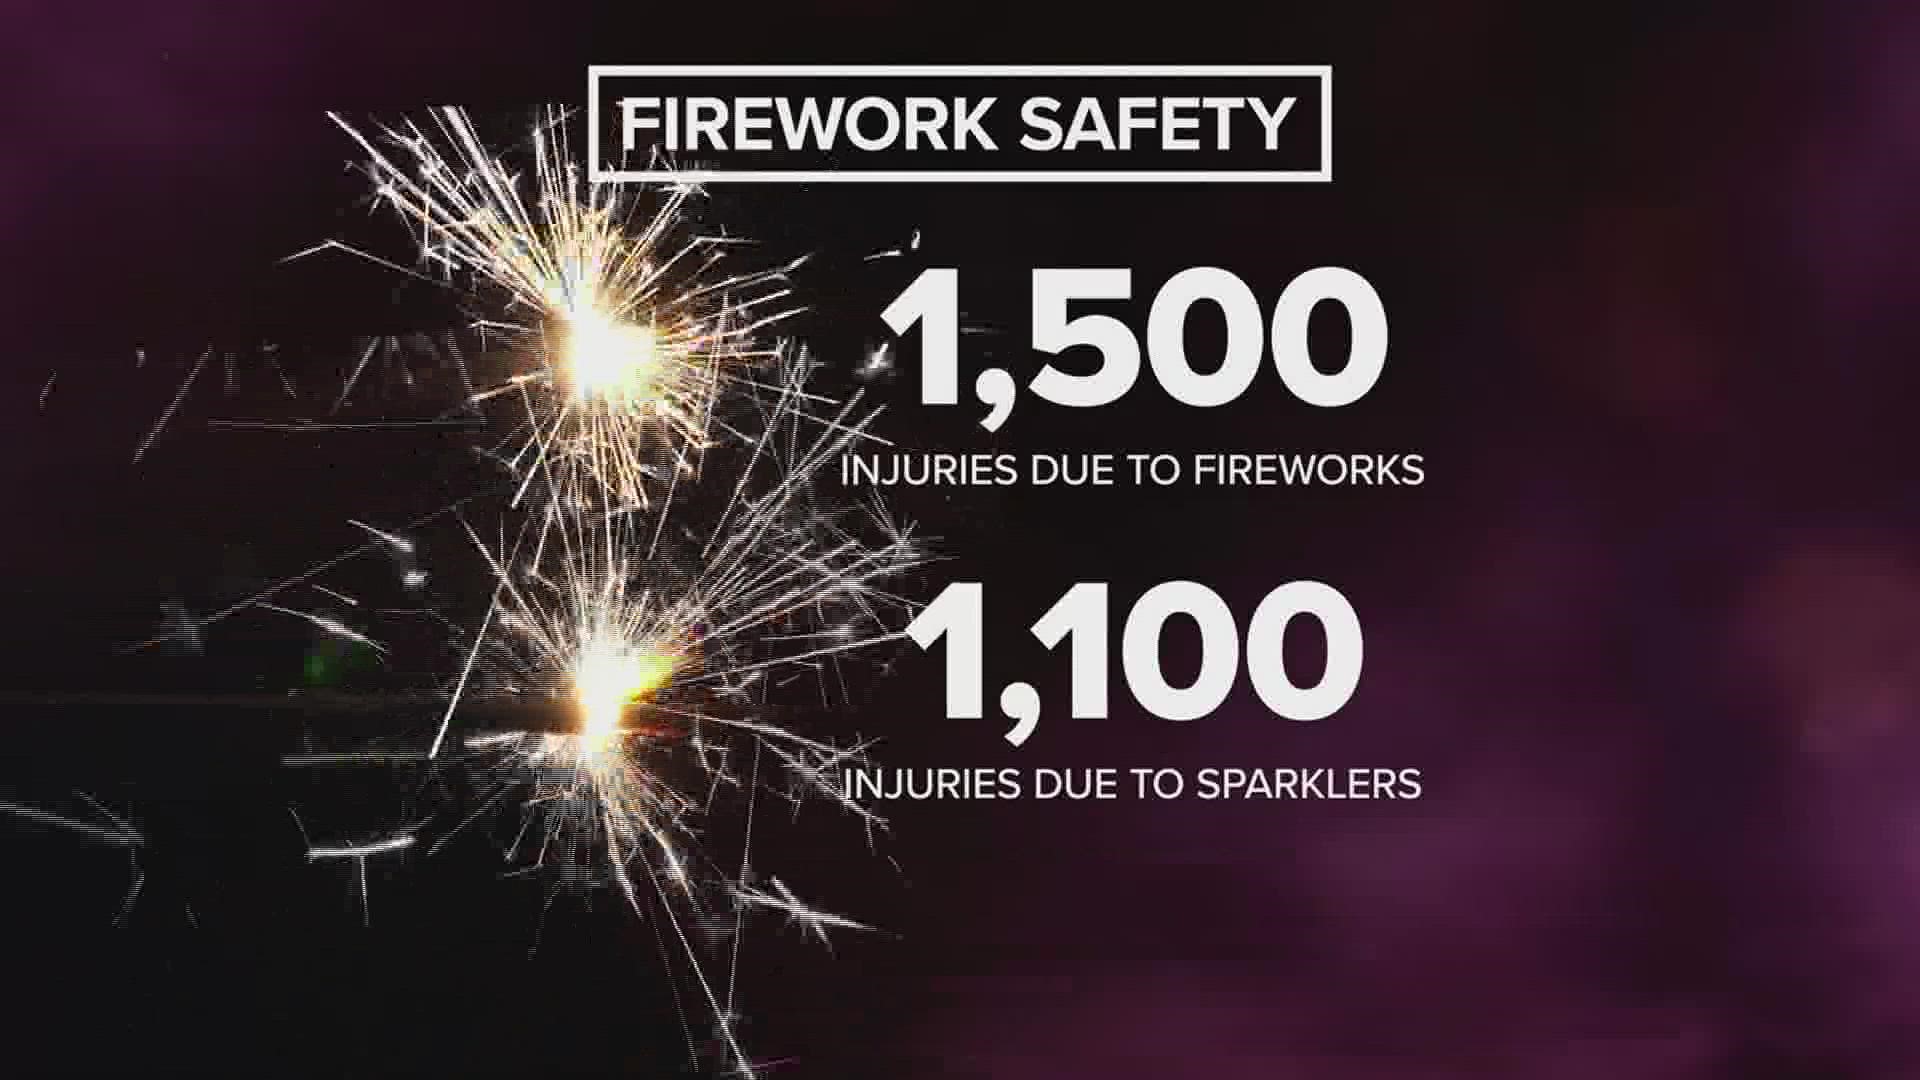 As the Fourth of July approaches officials are stressing firework safety.